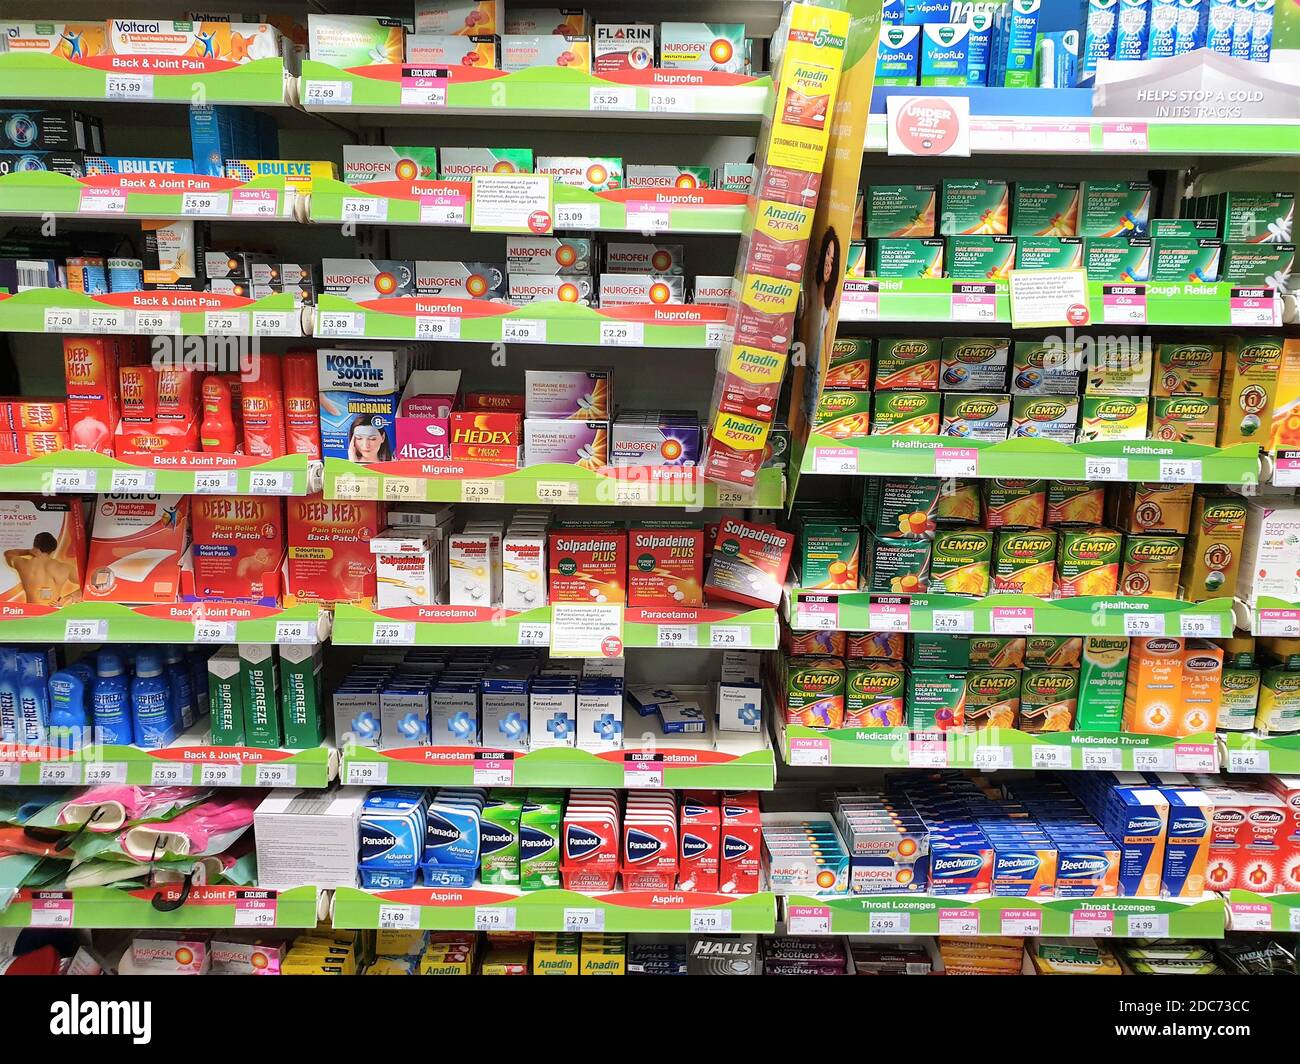 Interior of Superdrug store with display of over the counter medicine Stock Photo